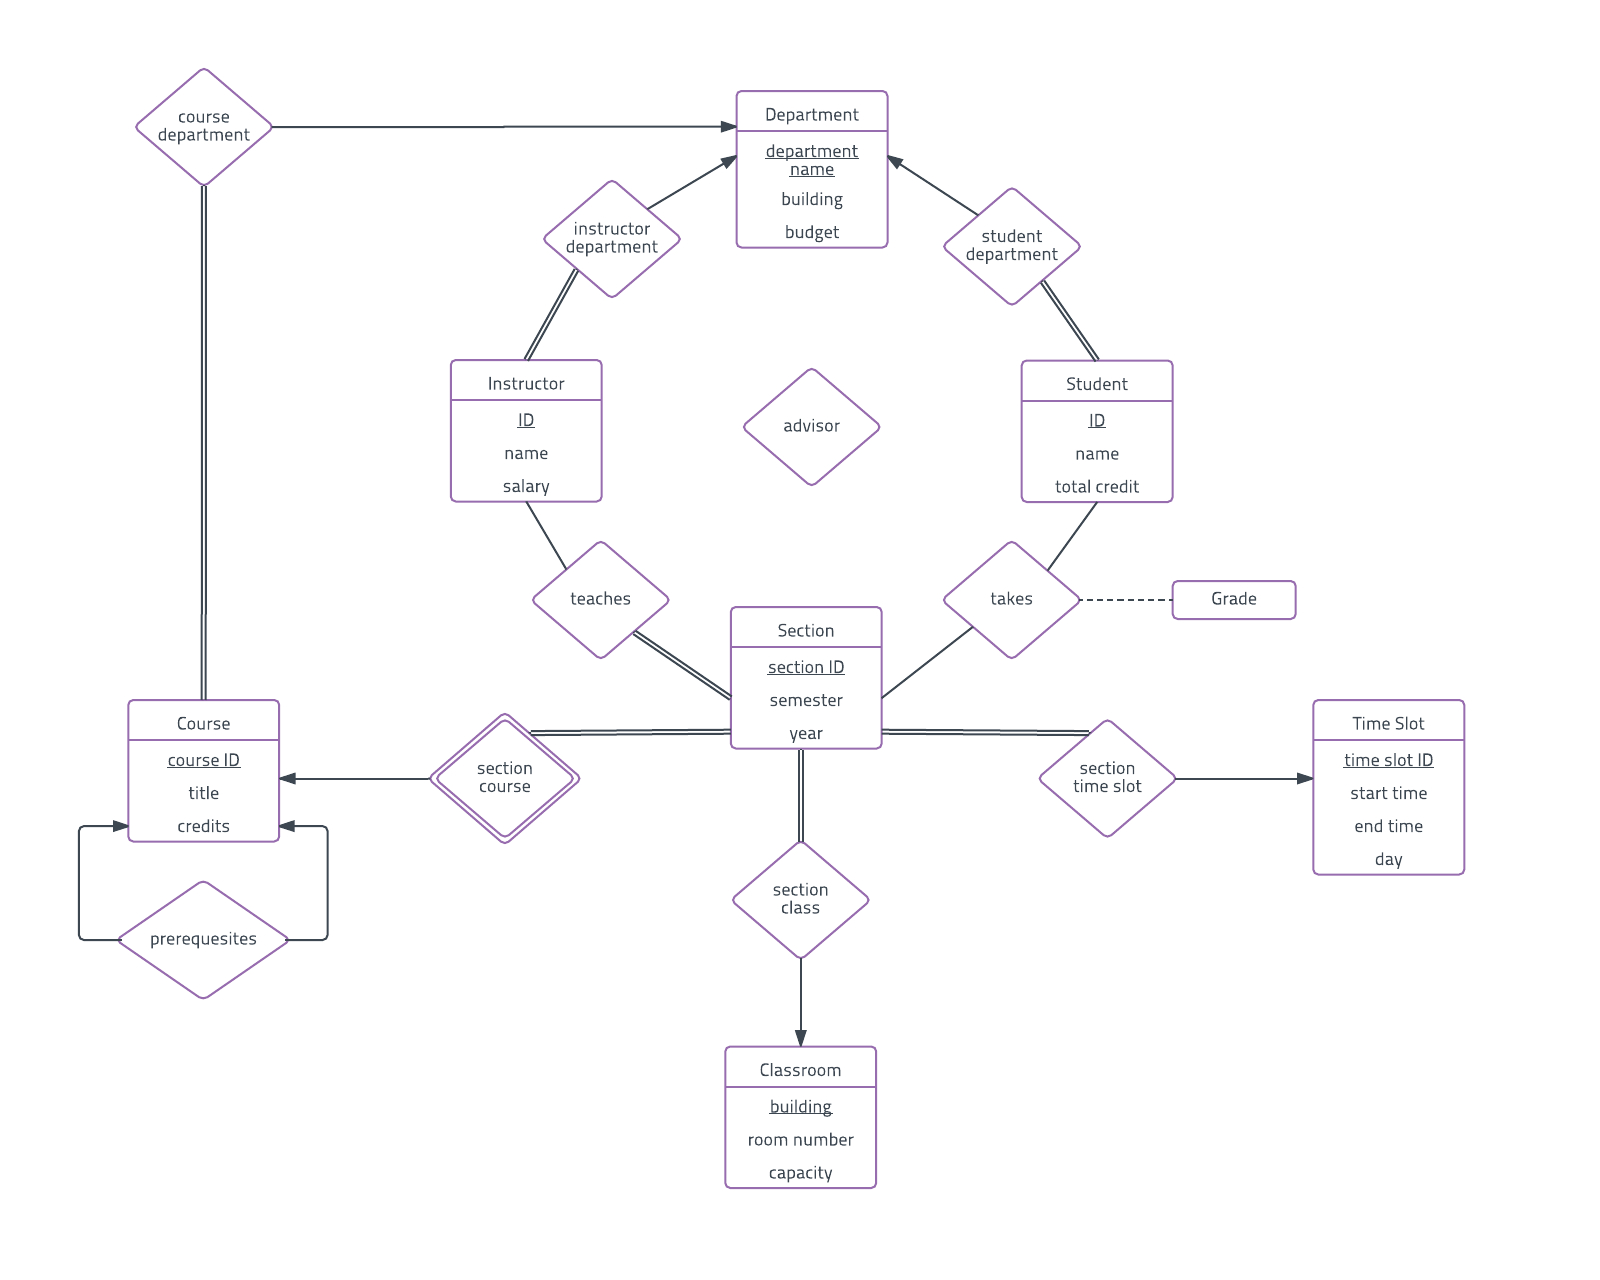 Er Diagram Examples And Templates | Lucidchart within Entity Relationship Diagram Solved Examples